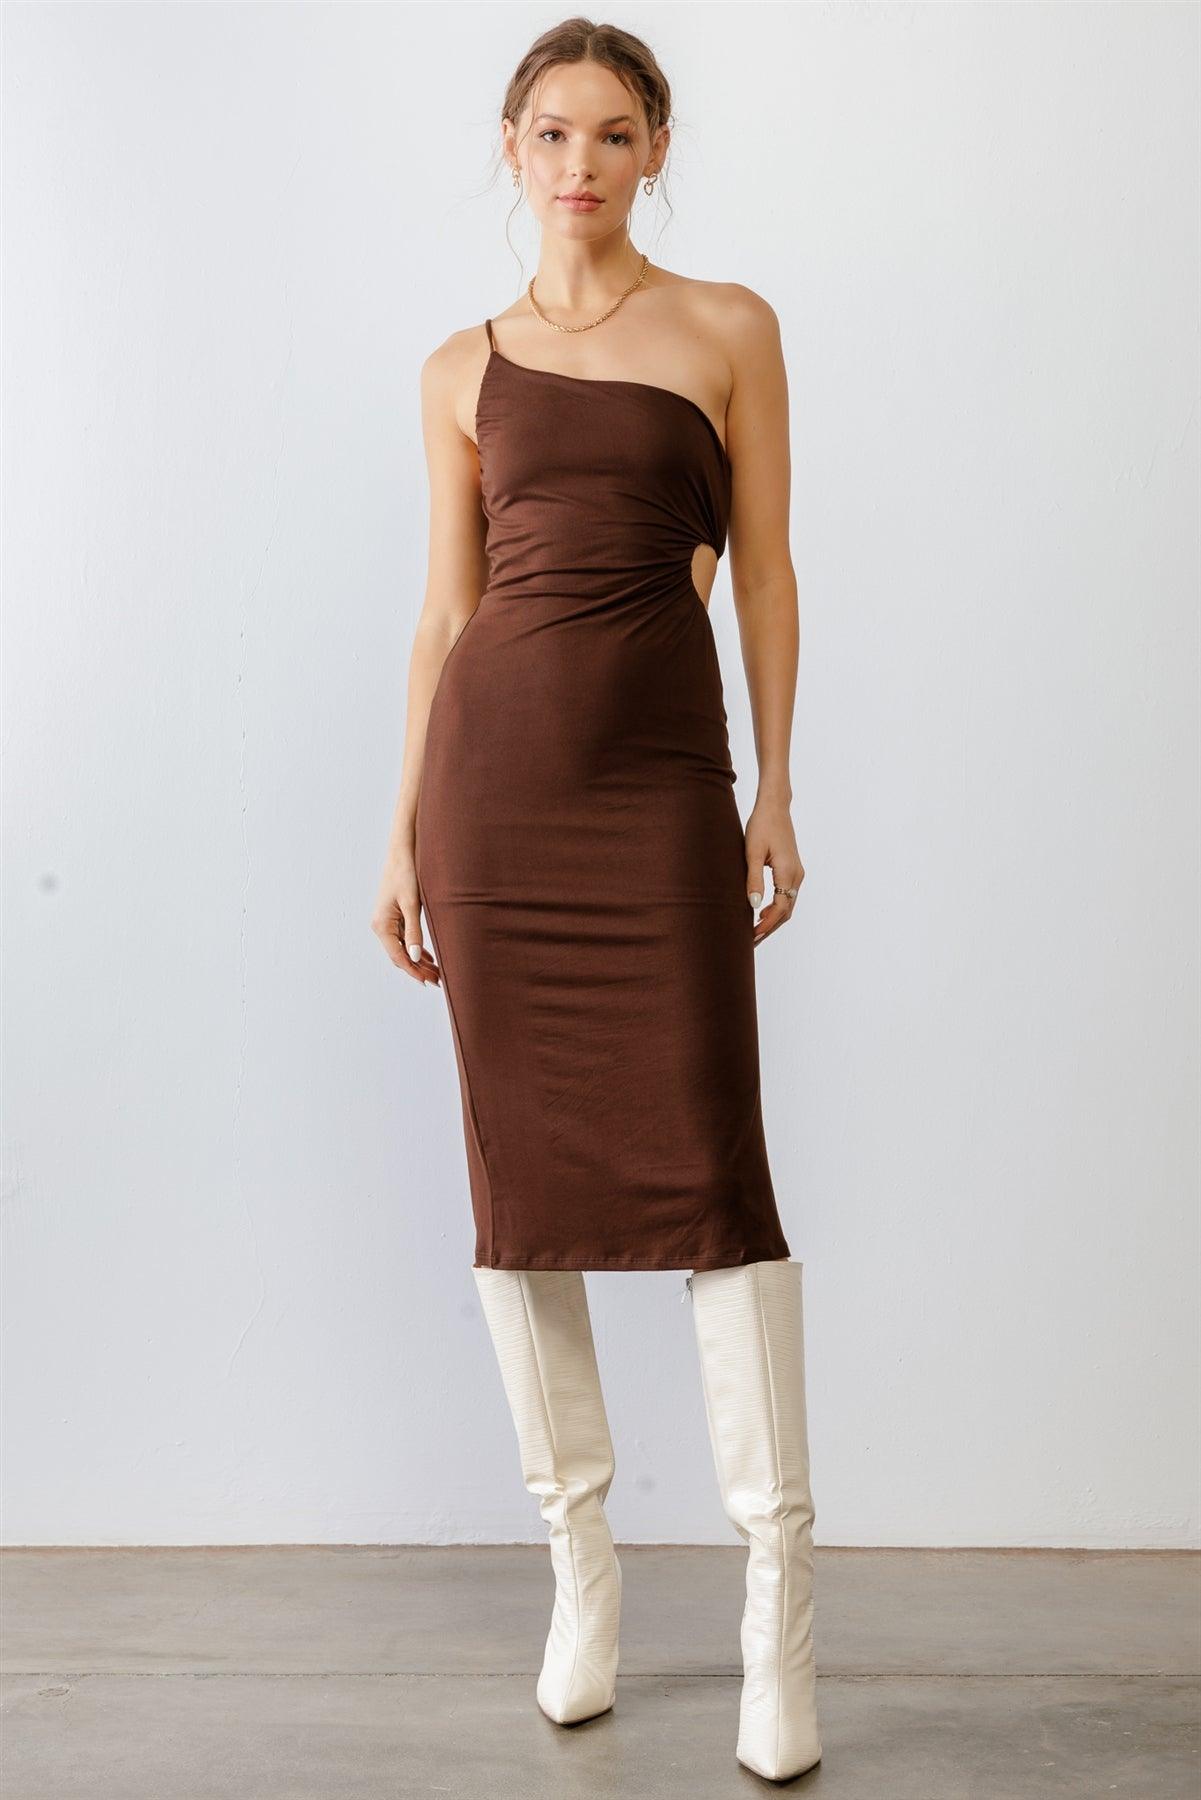 Wholesale clothing - Brown One Shoulder Cut-Out Side Midi Dress /3-2-1